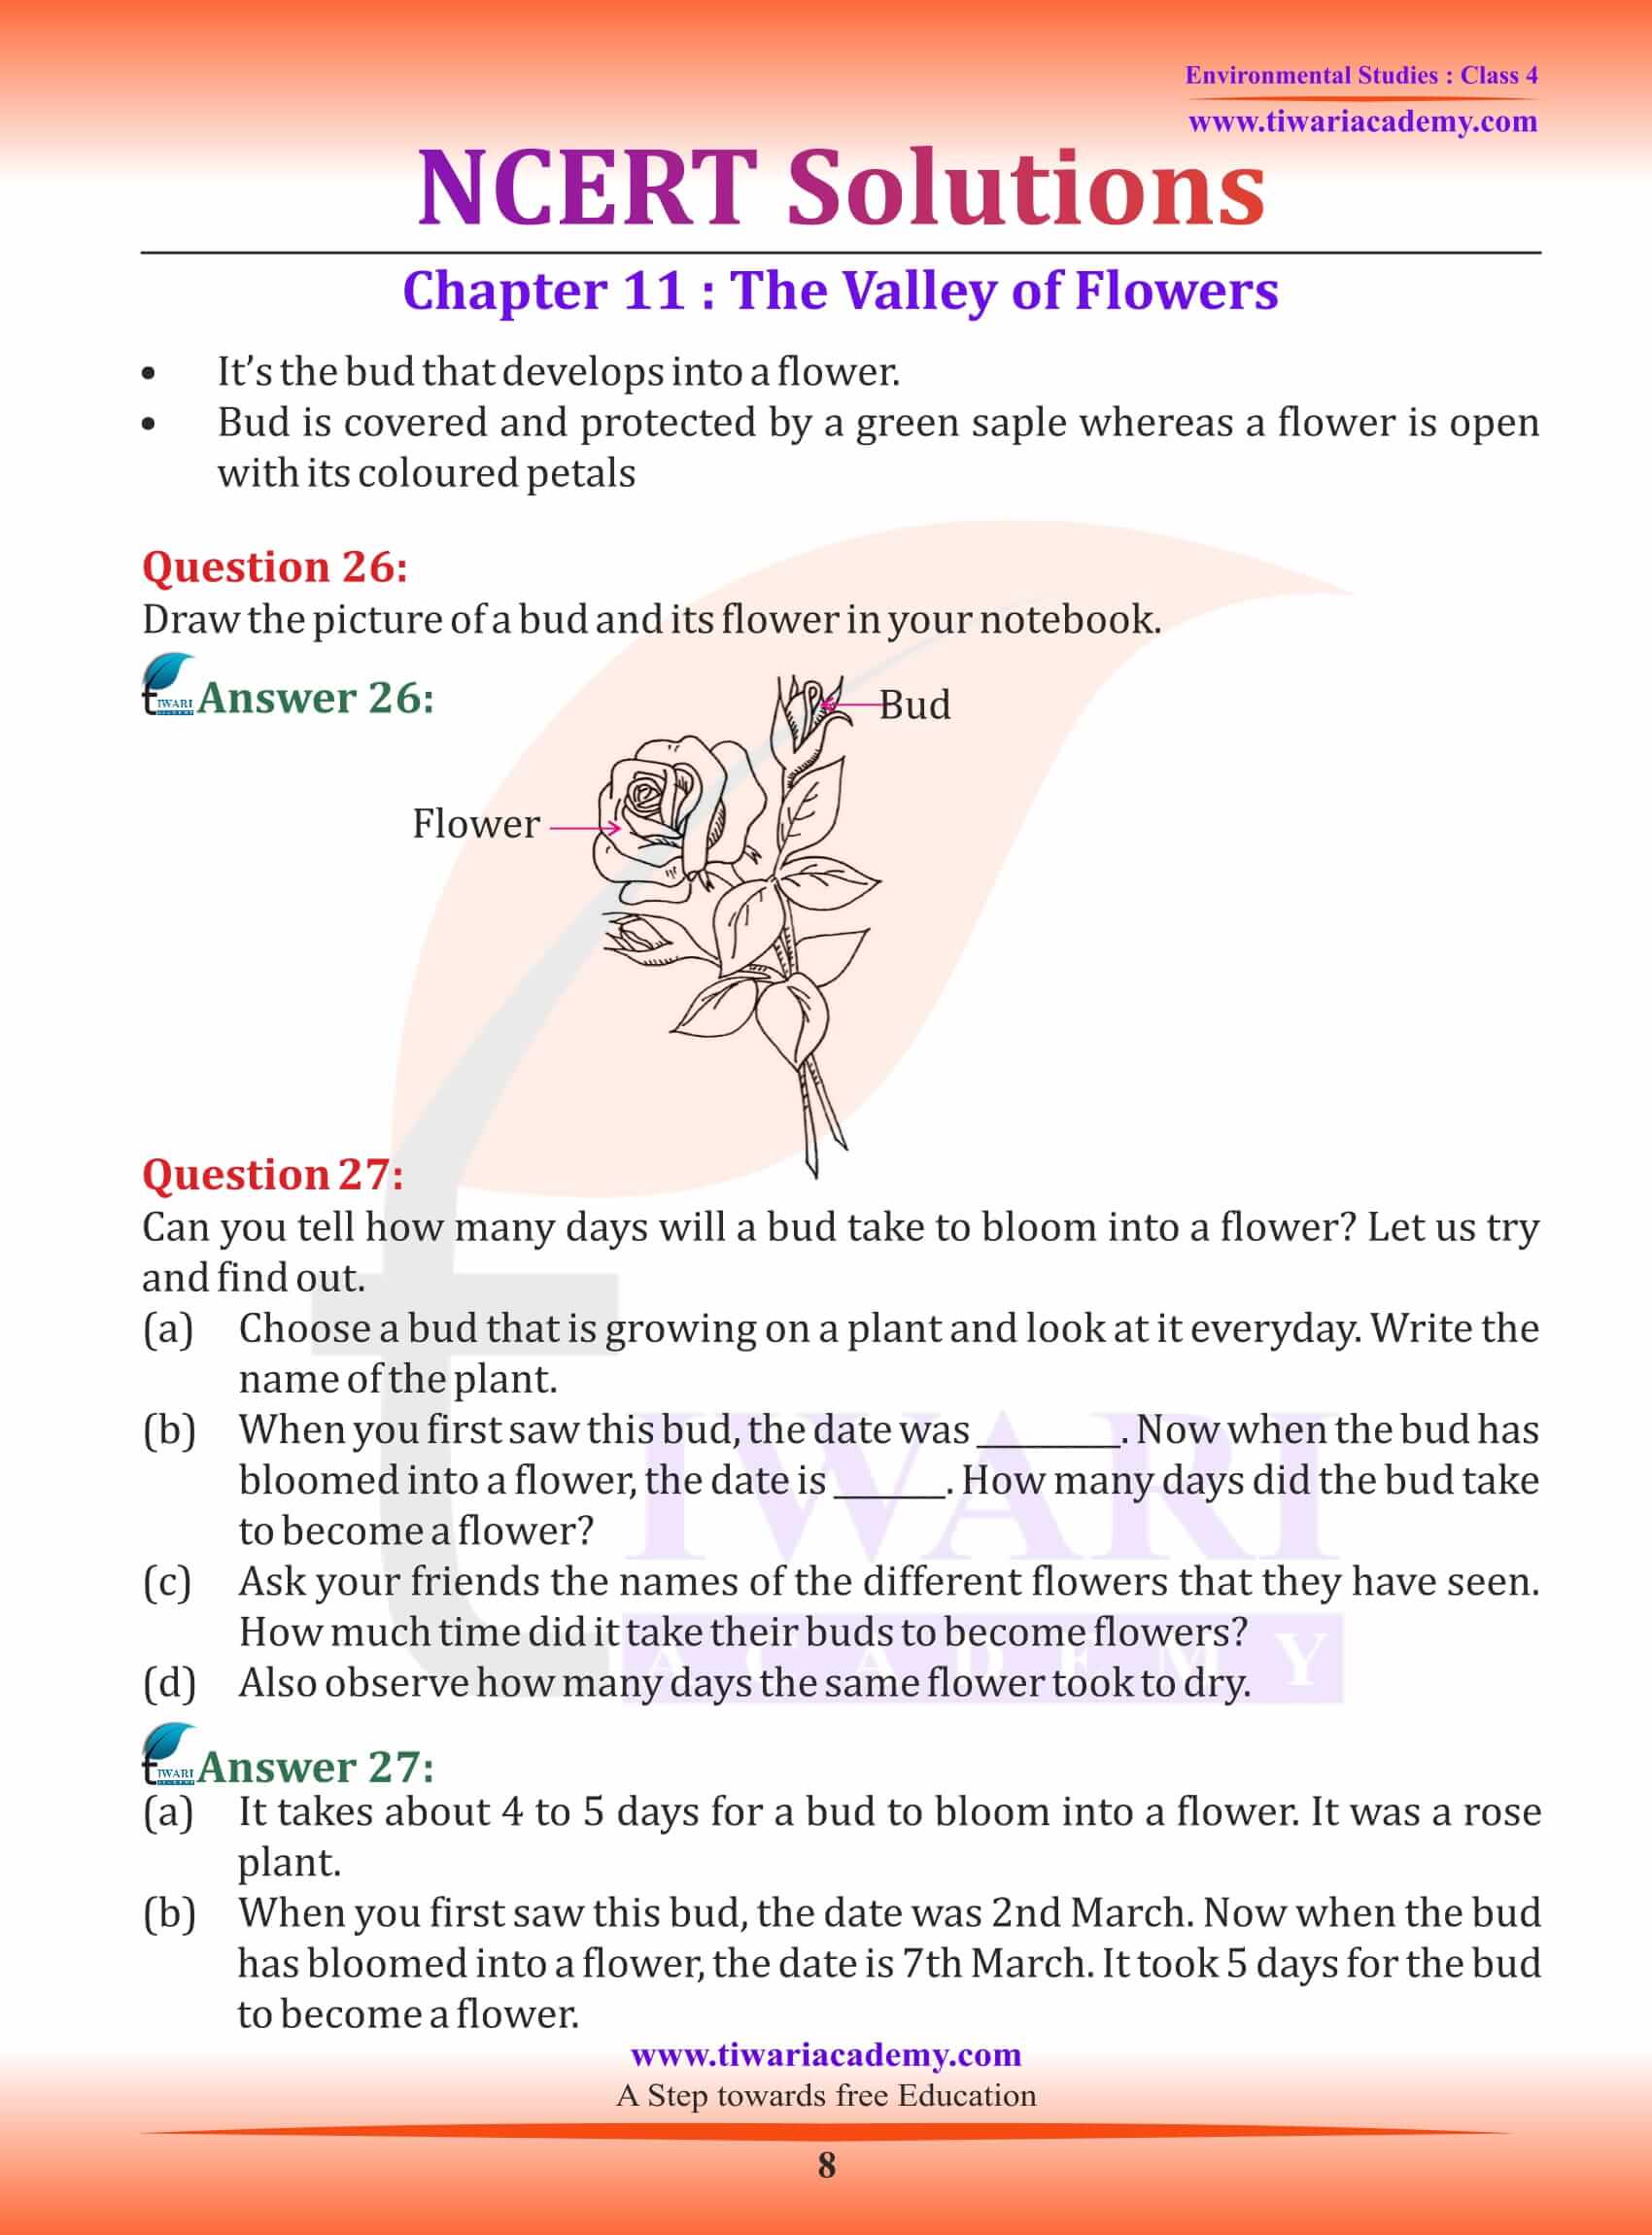 NCERT Solutions for Class 4 EVS Chapter 11 free guide